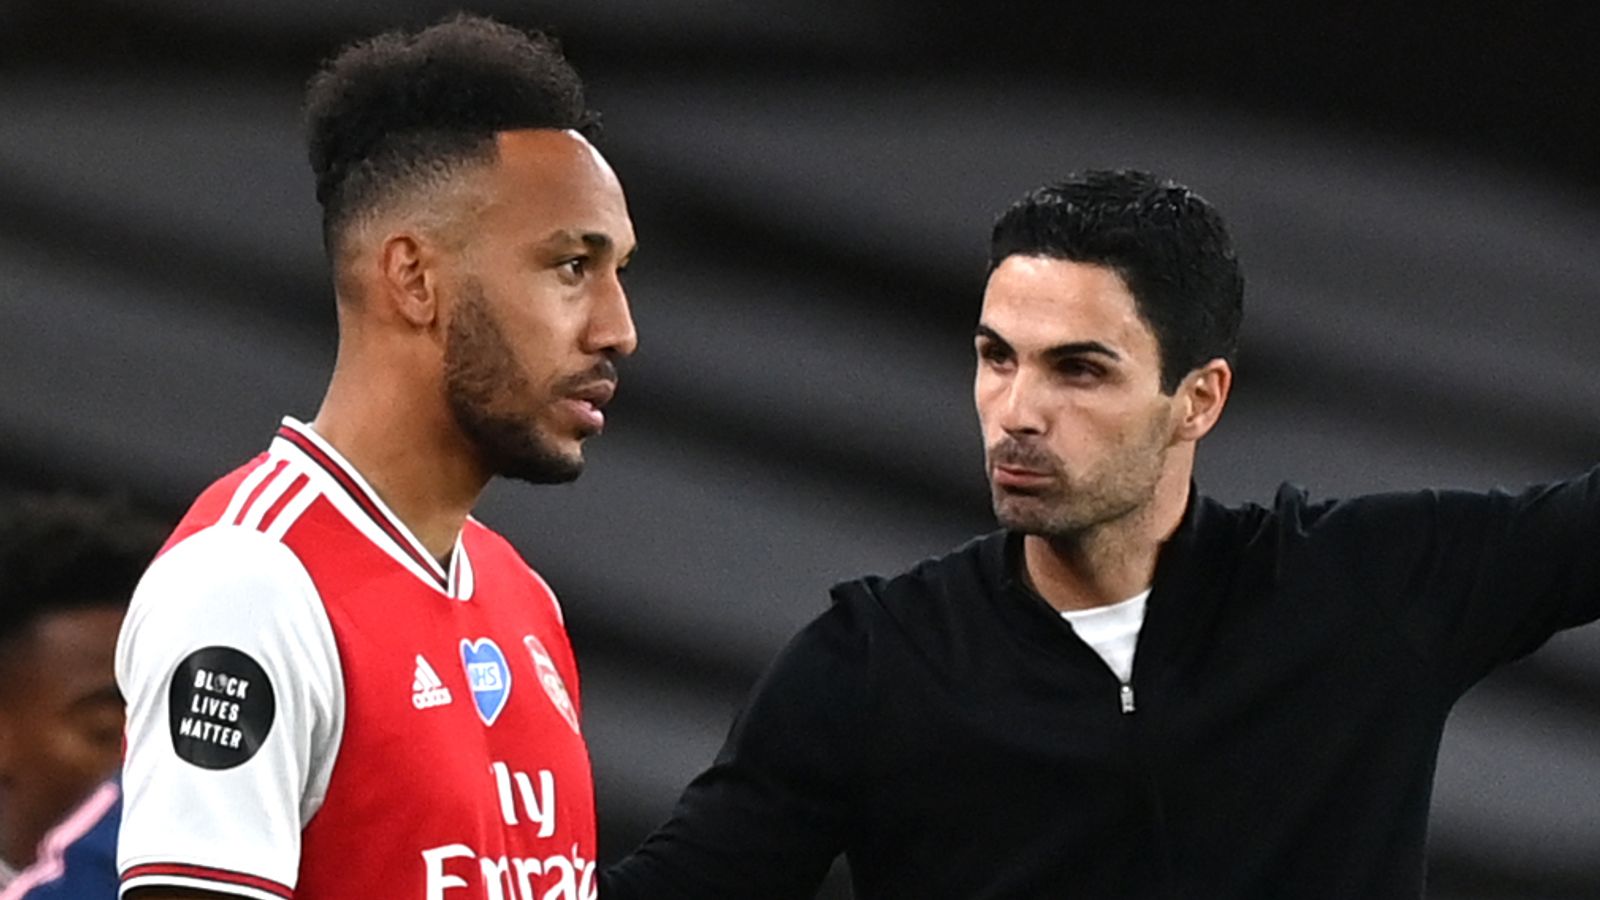 chelsea-boss-graham-potter-keen-not-to-make-arsenal-clash-about-pierre-emerick-aubameyang-ahead-of-reunion